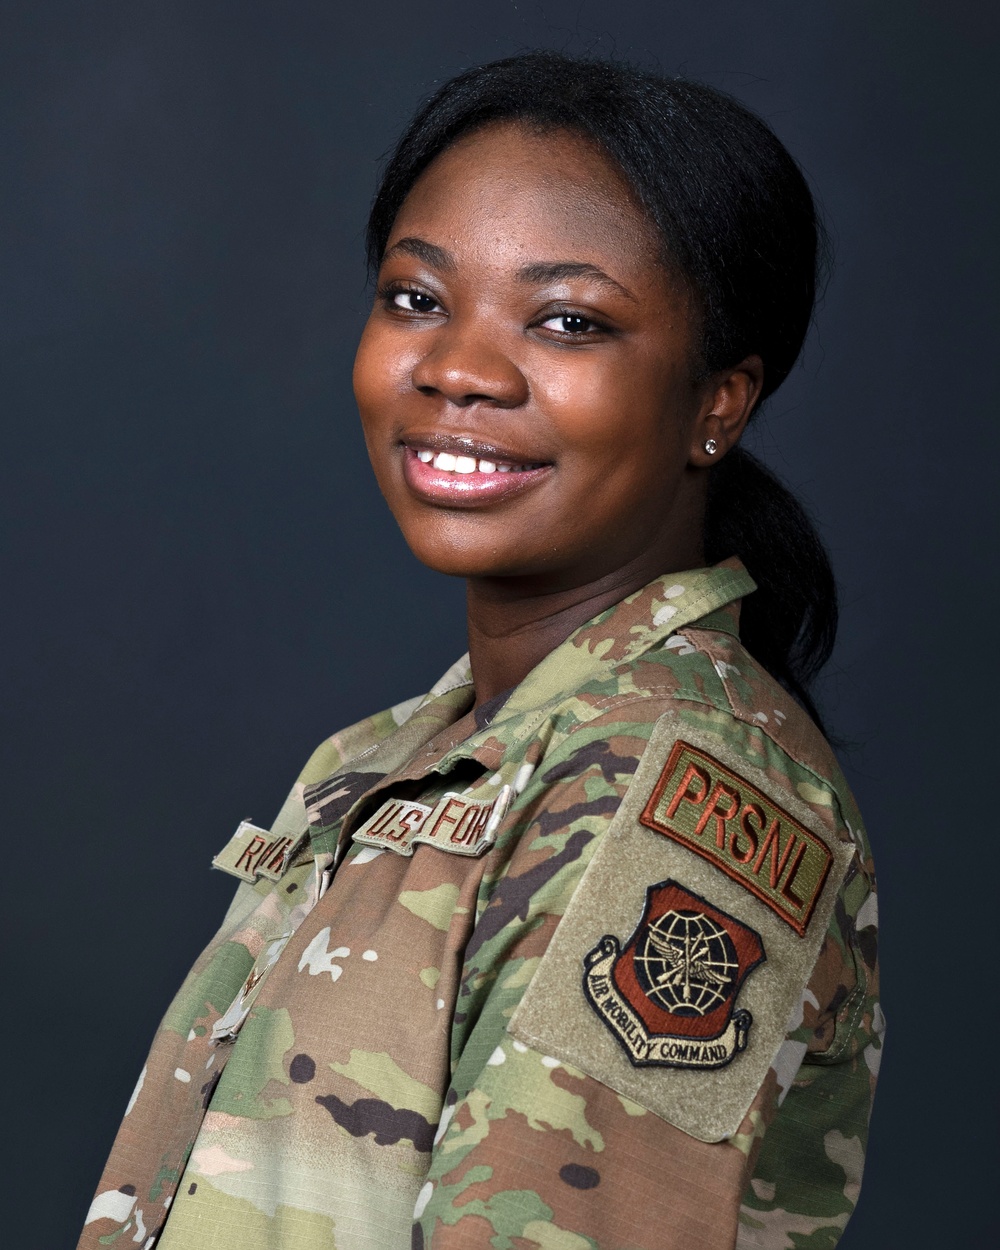 Resiliency, one Airman’s journey from Ghana to joining the force